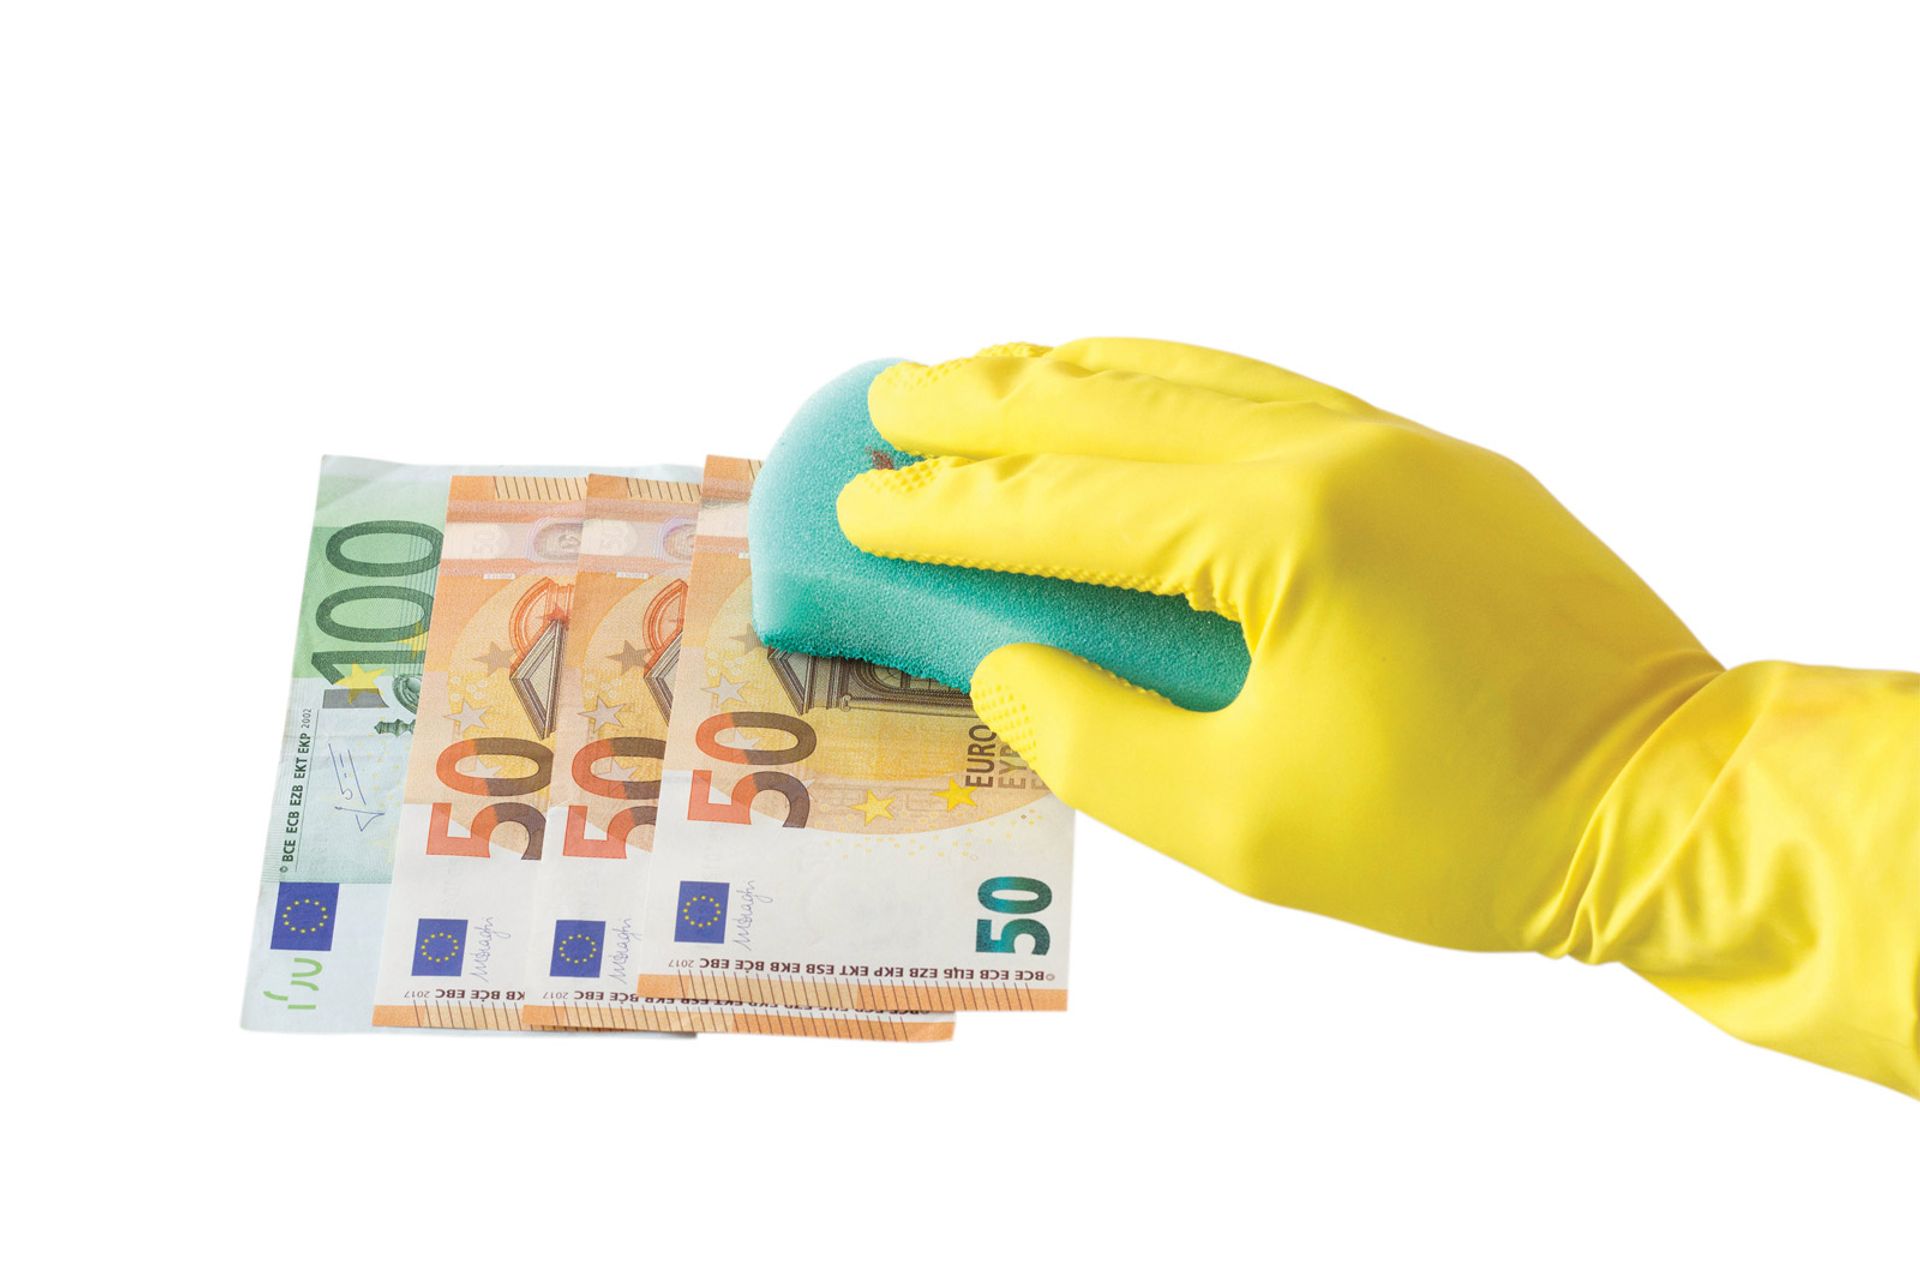 The EU’s Fifth Anti-Money Laundering Directive means many art dealers will have to comply with obligations designed to combat financial crime and terrorist funding © Marco Verch